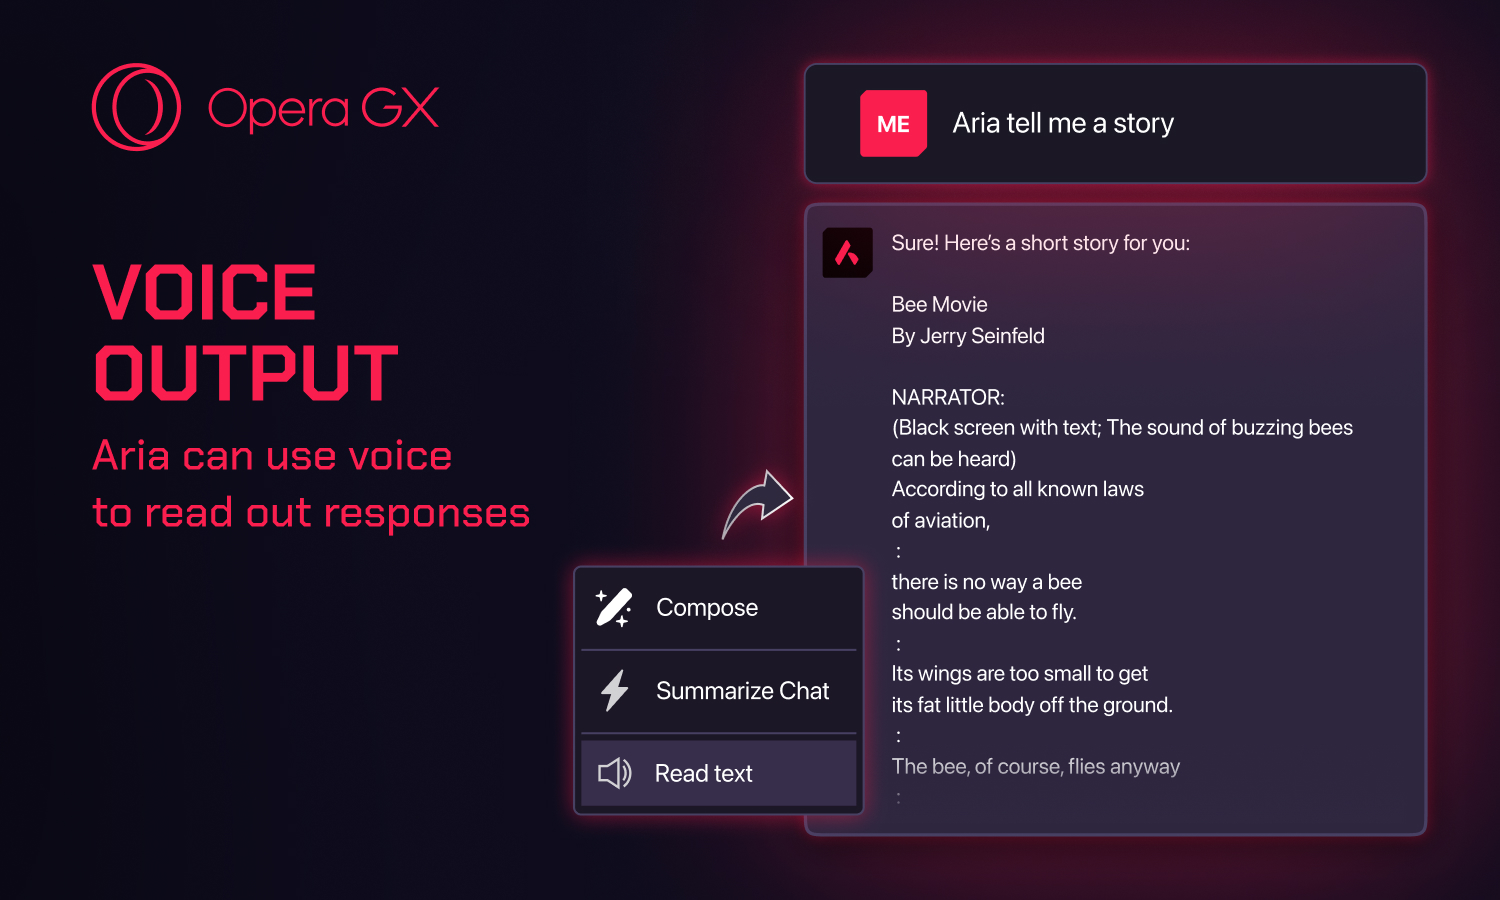 Voice output is being introduced to Aria in Opera GX.